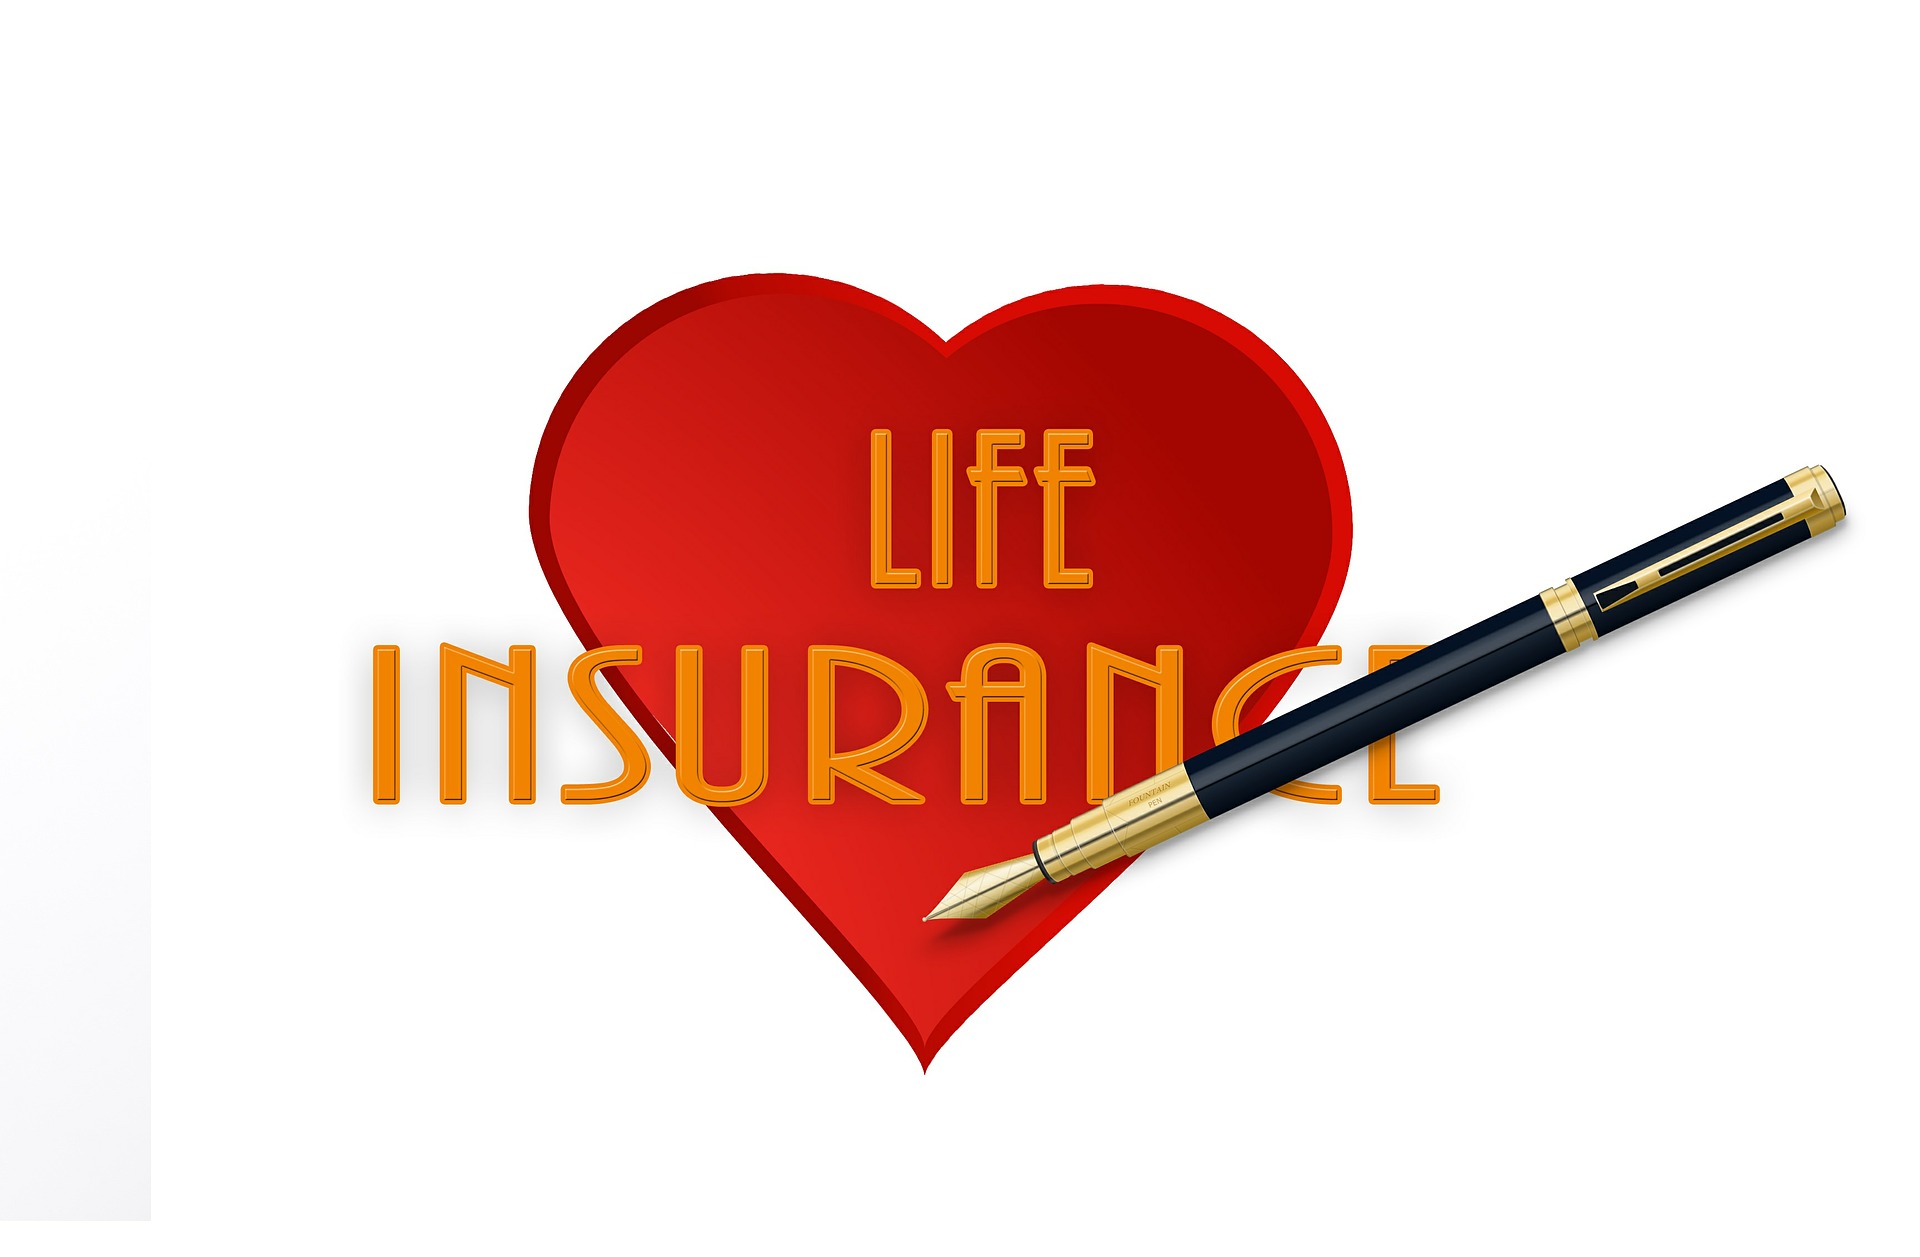 Can life insurance for company directors really be tax deductible?